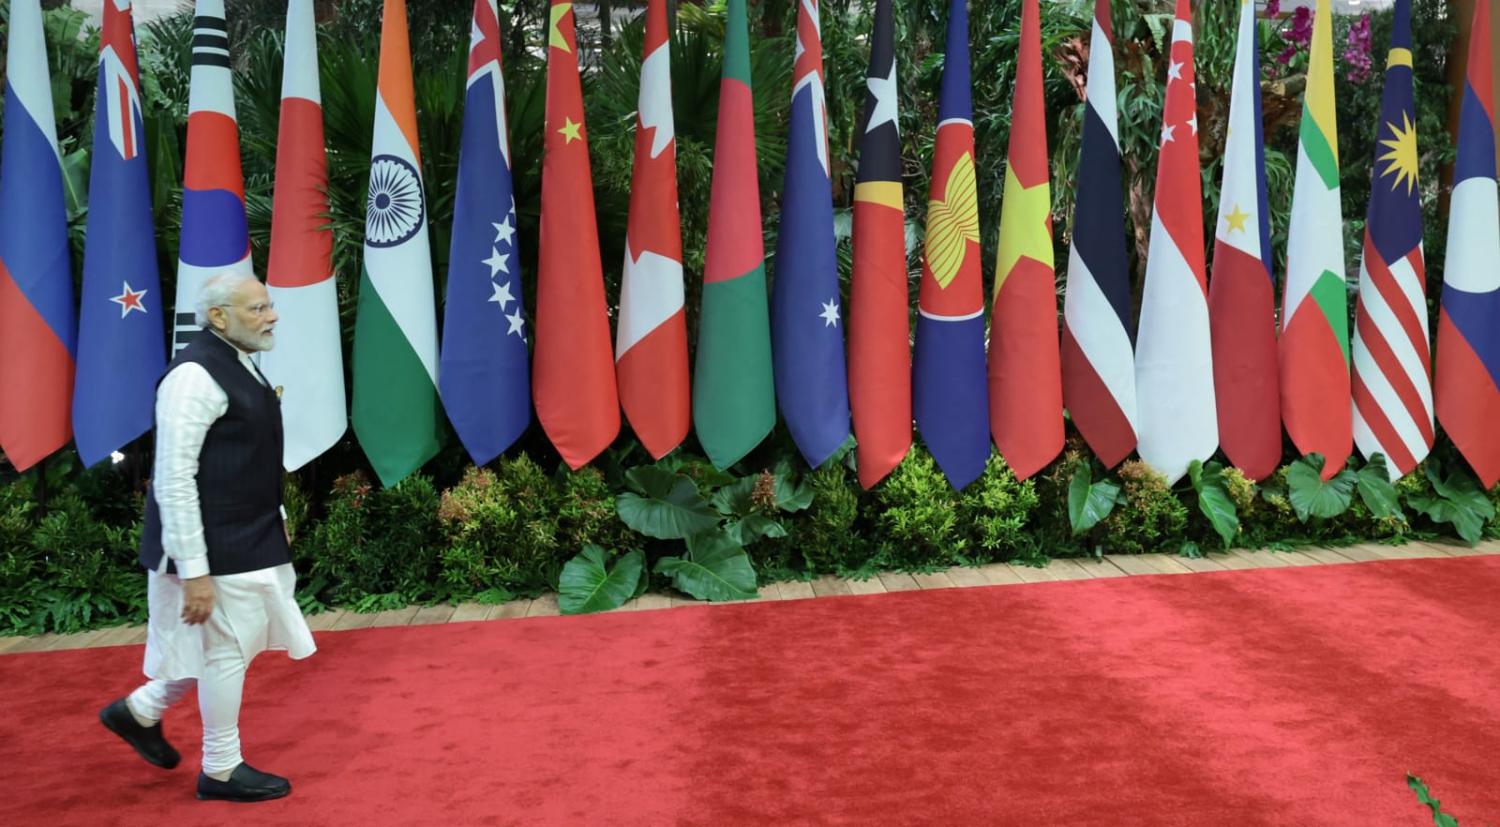 India's Prime Minister Narendra Modi arriving for the 2023 ASEAN-India Summit in Jakarta, Indonesia (MEA Photo Gallery/Flickr)